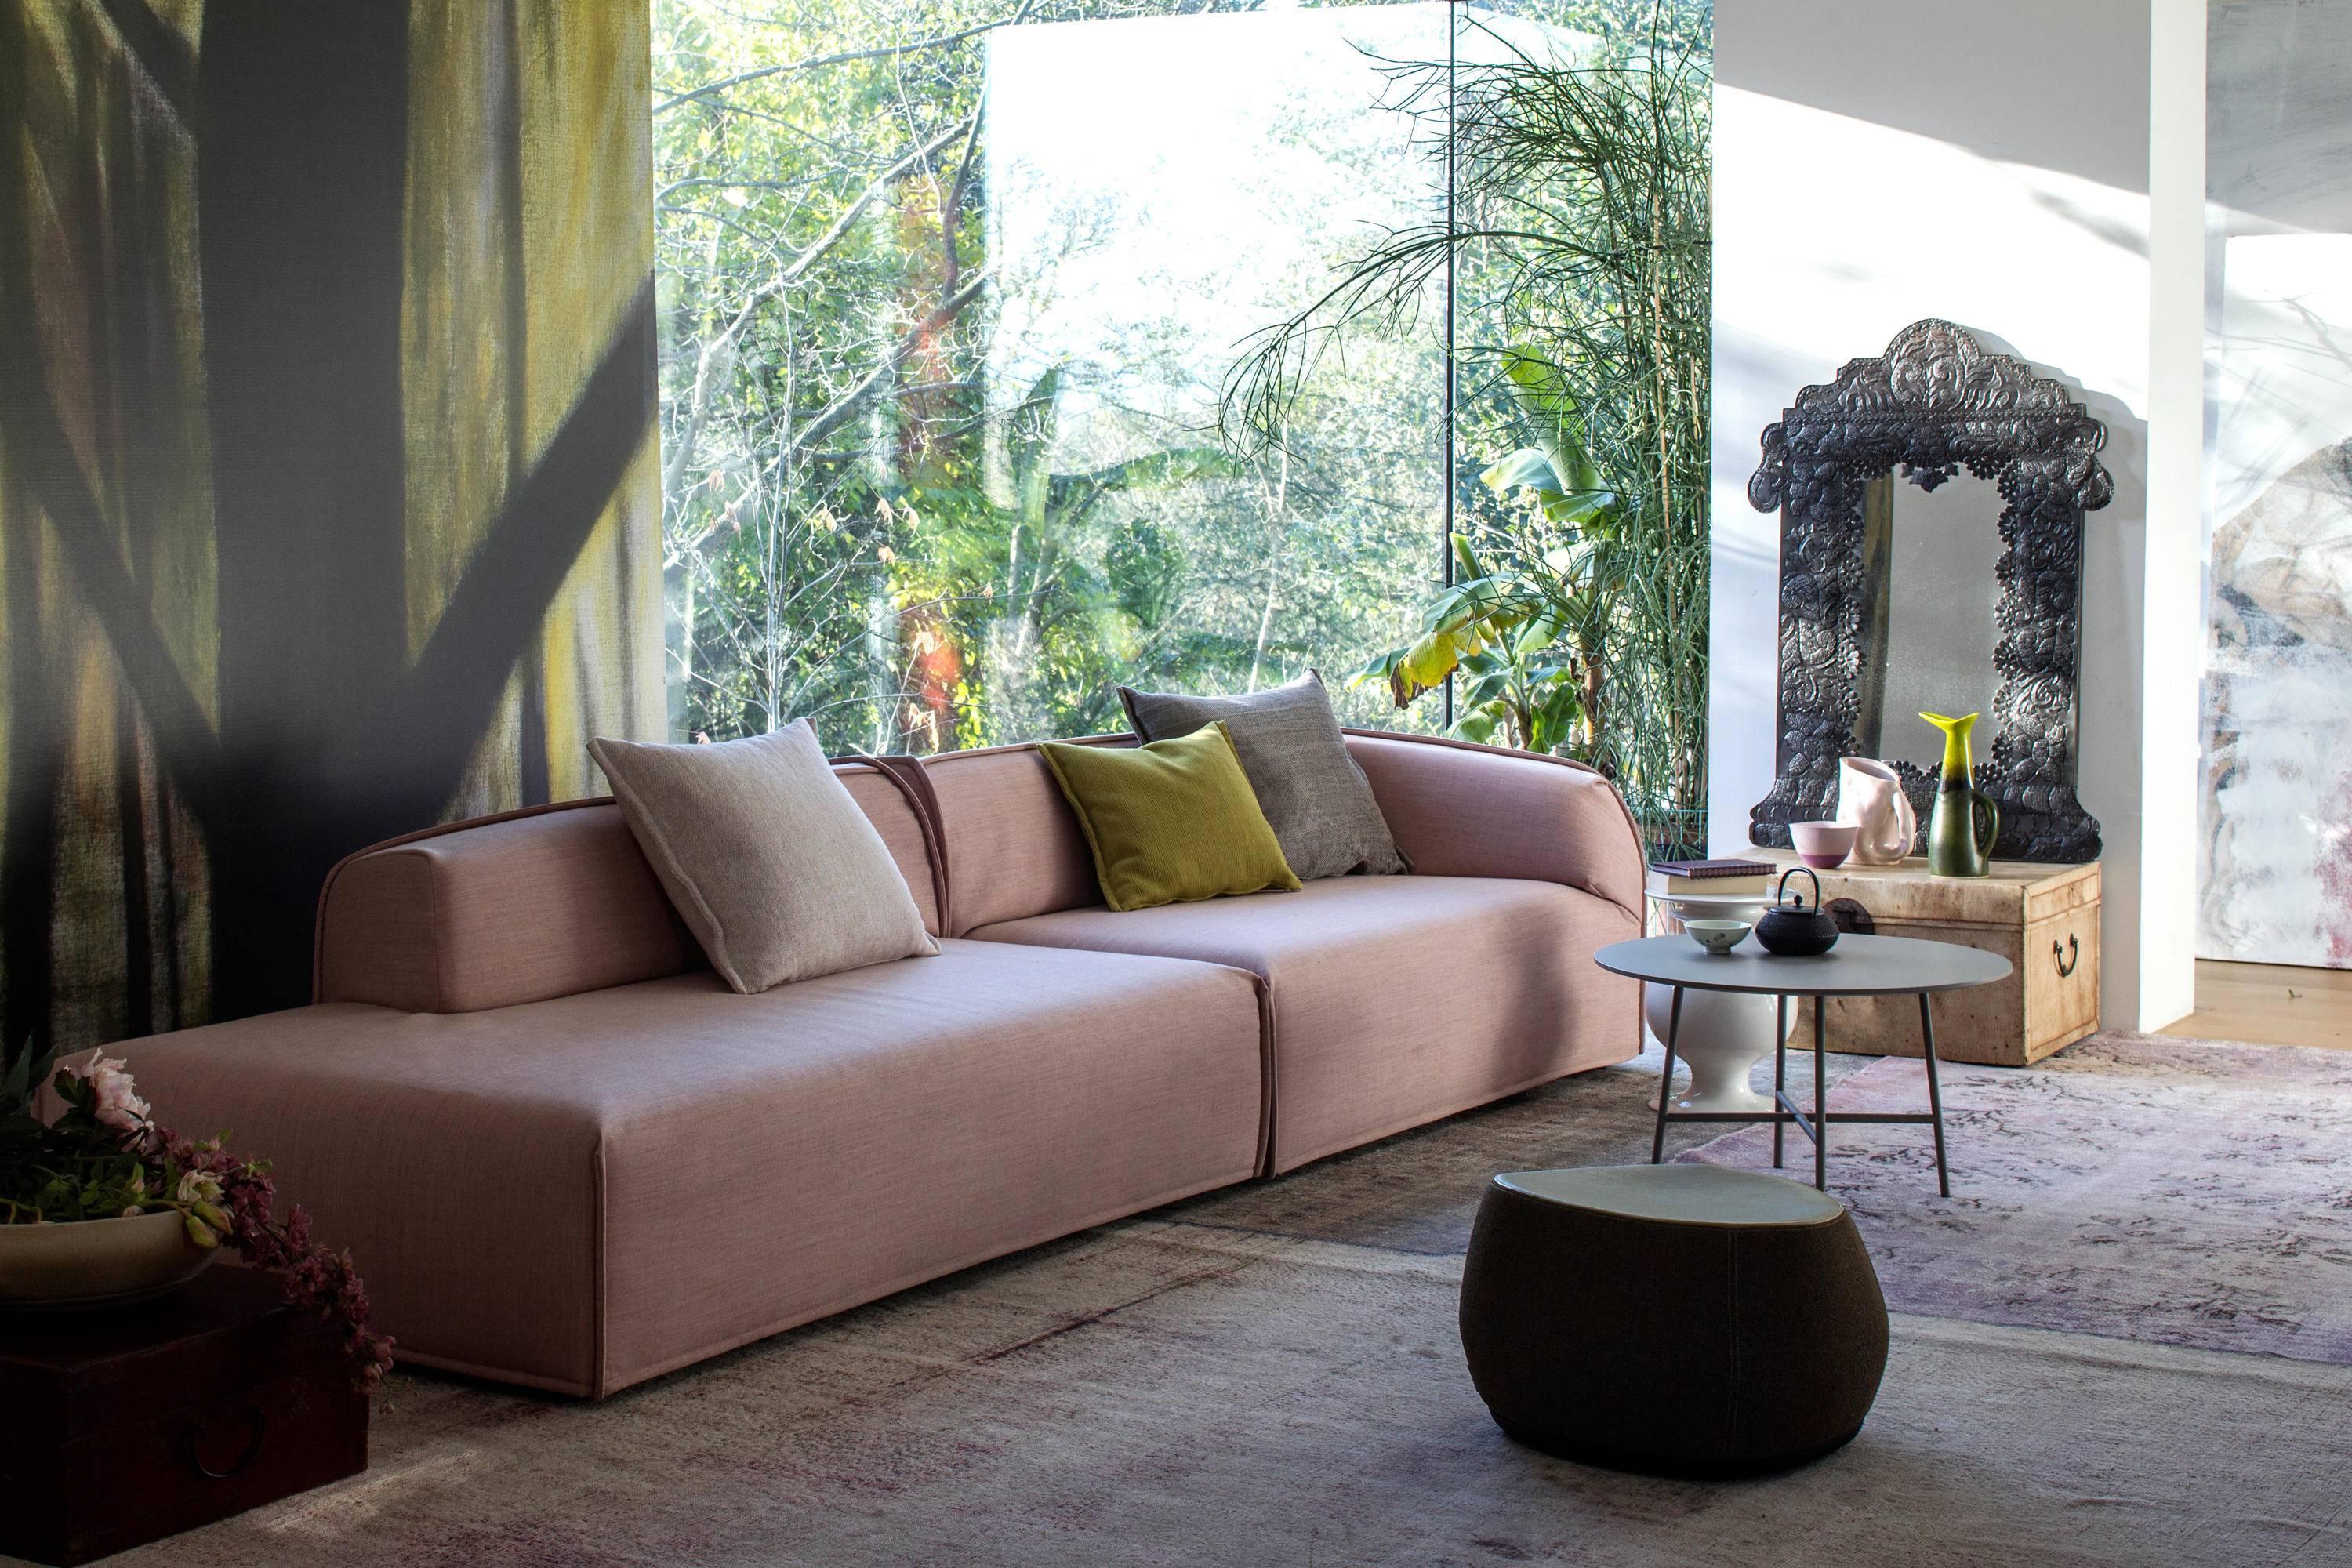 M.A.S.S.A.S Modular Sofa by Patricia Urquiola for Moroso in Fabric im Angebot 2